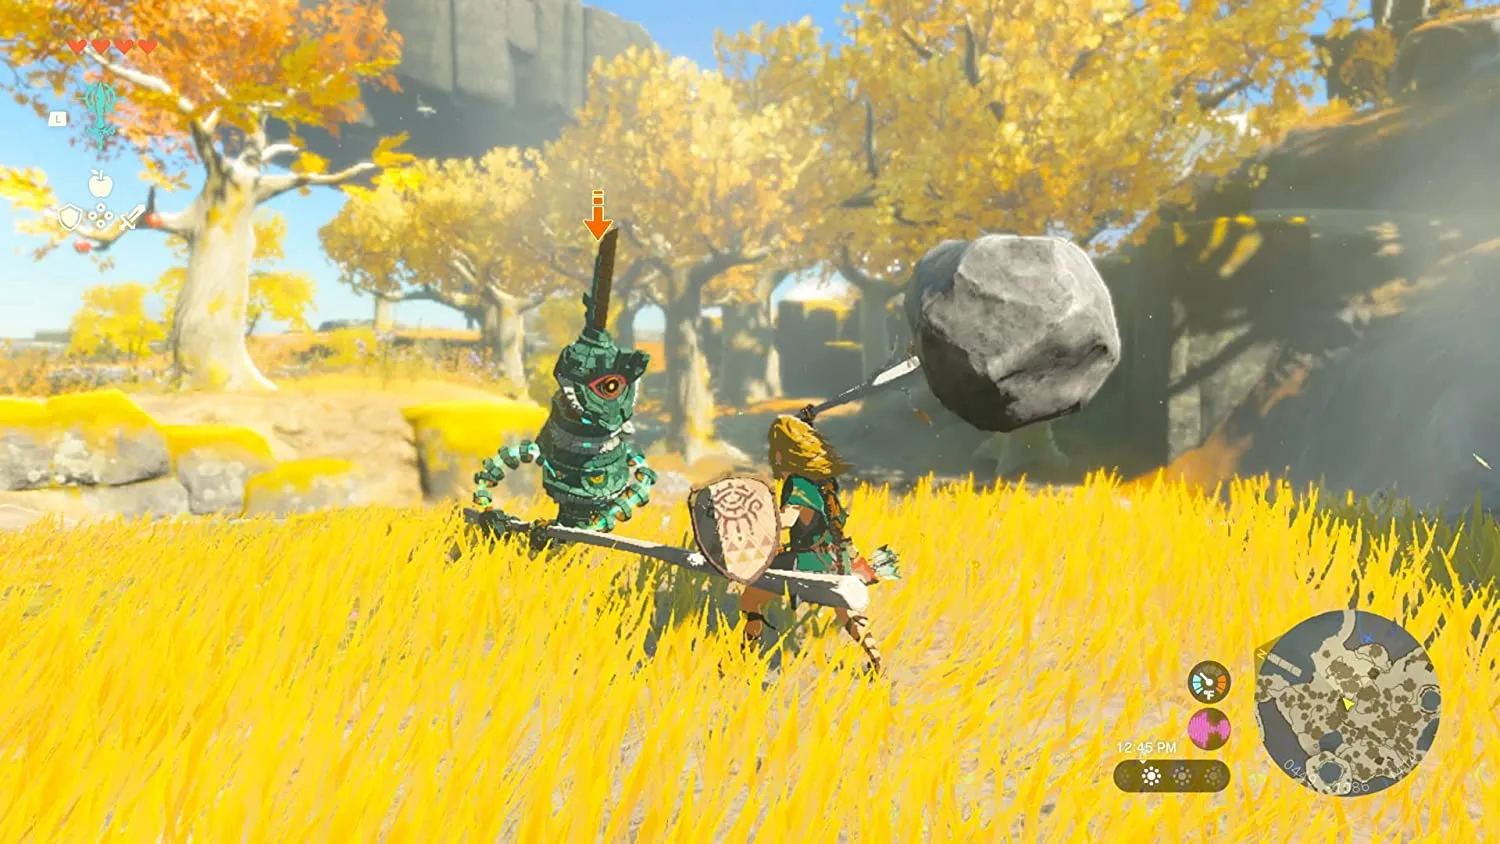 Zelda Reviews: People Sure Do Seem to Like that New Zelda Game